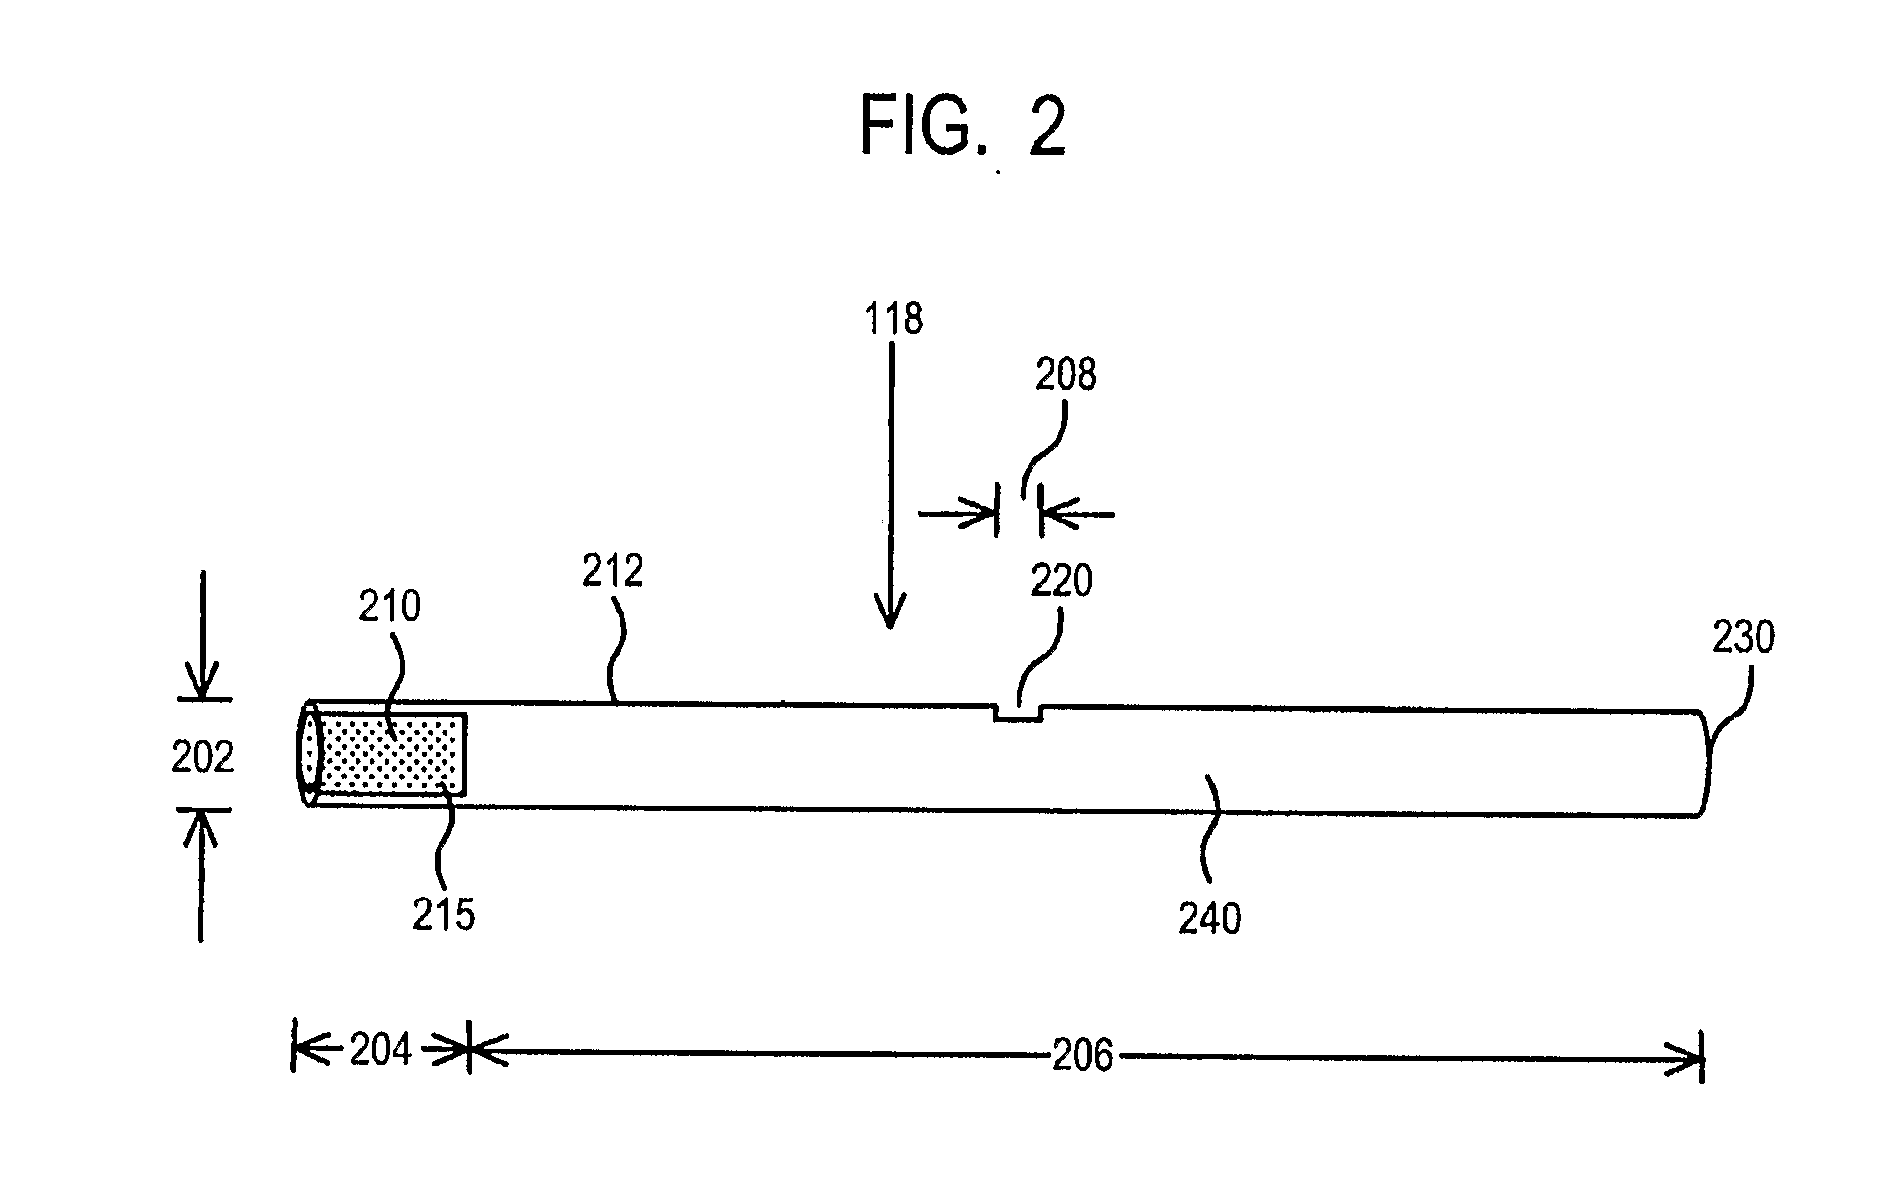 Portable vaporizing device and method for inhalation and/or aromatherapy without combustion